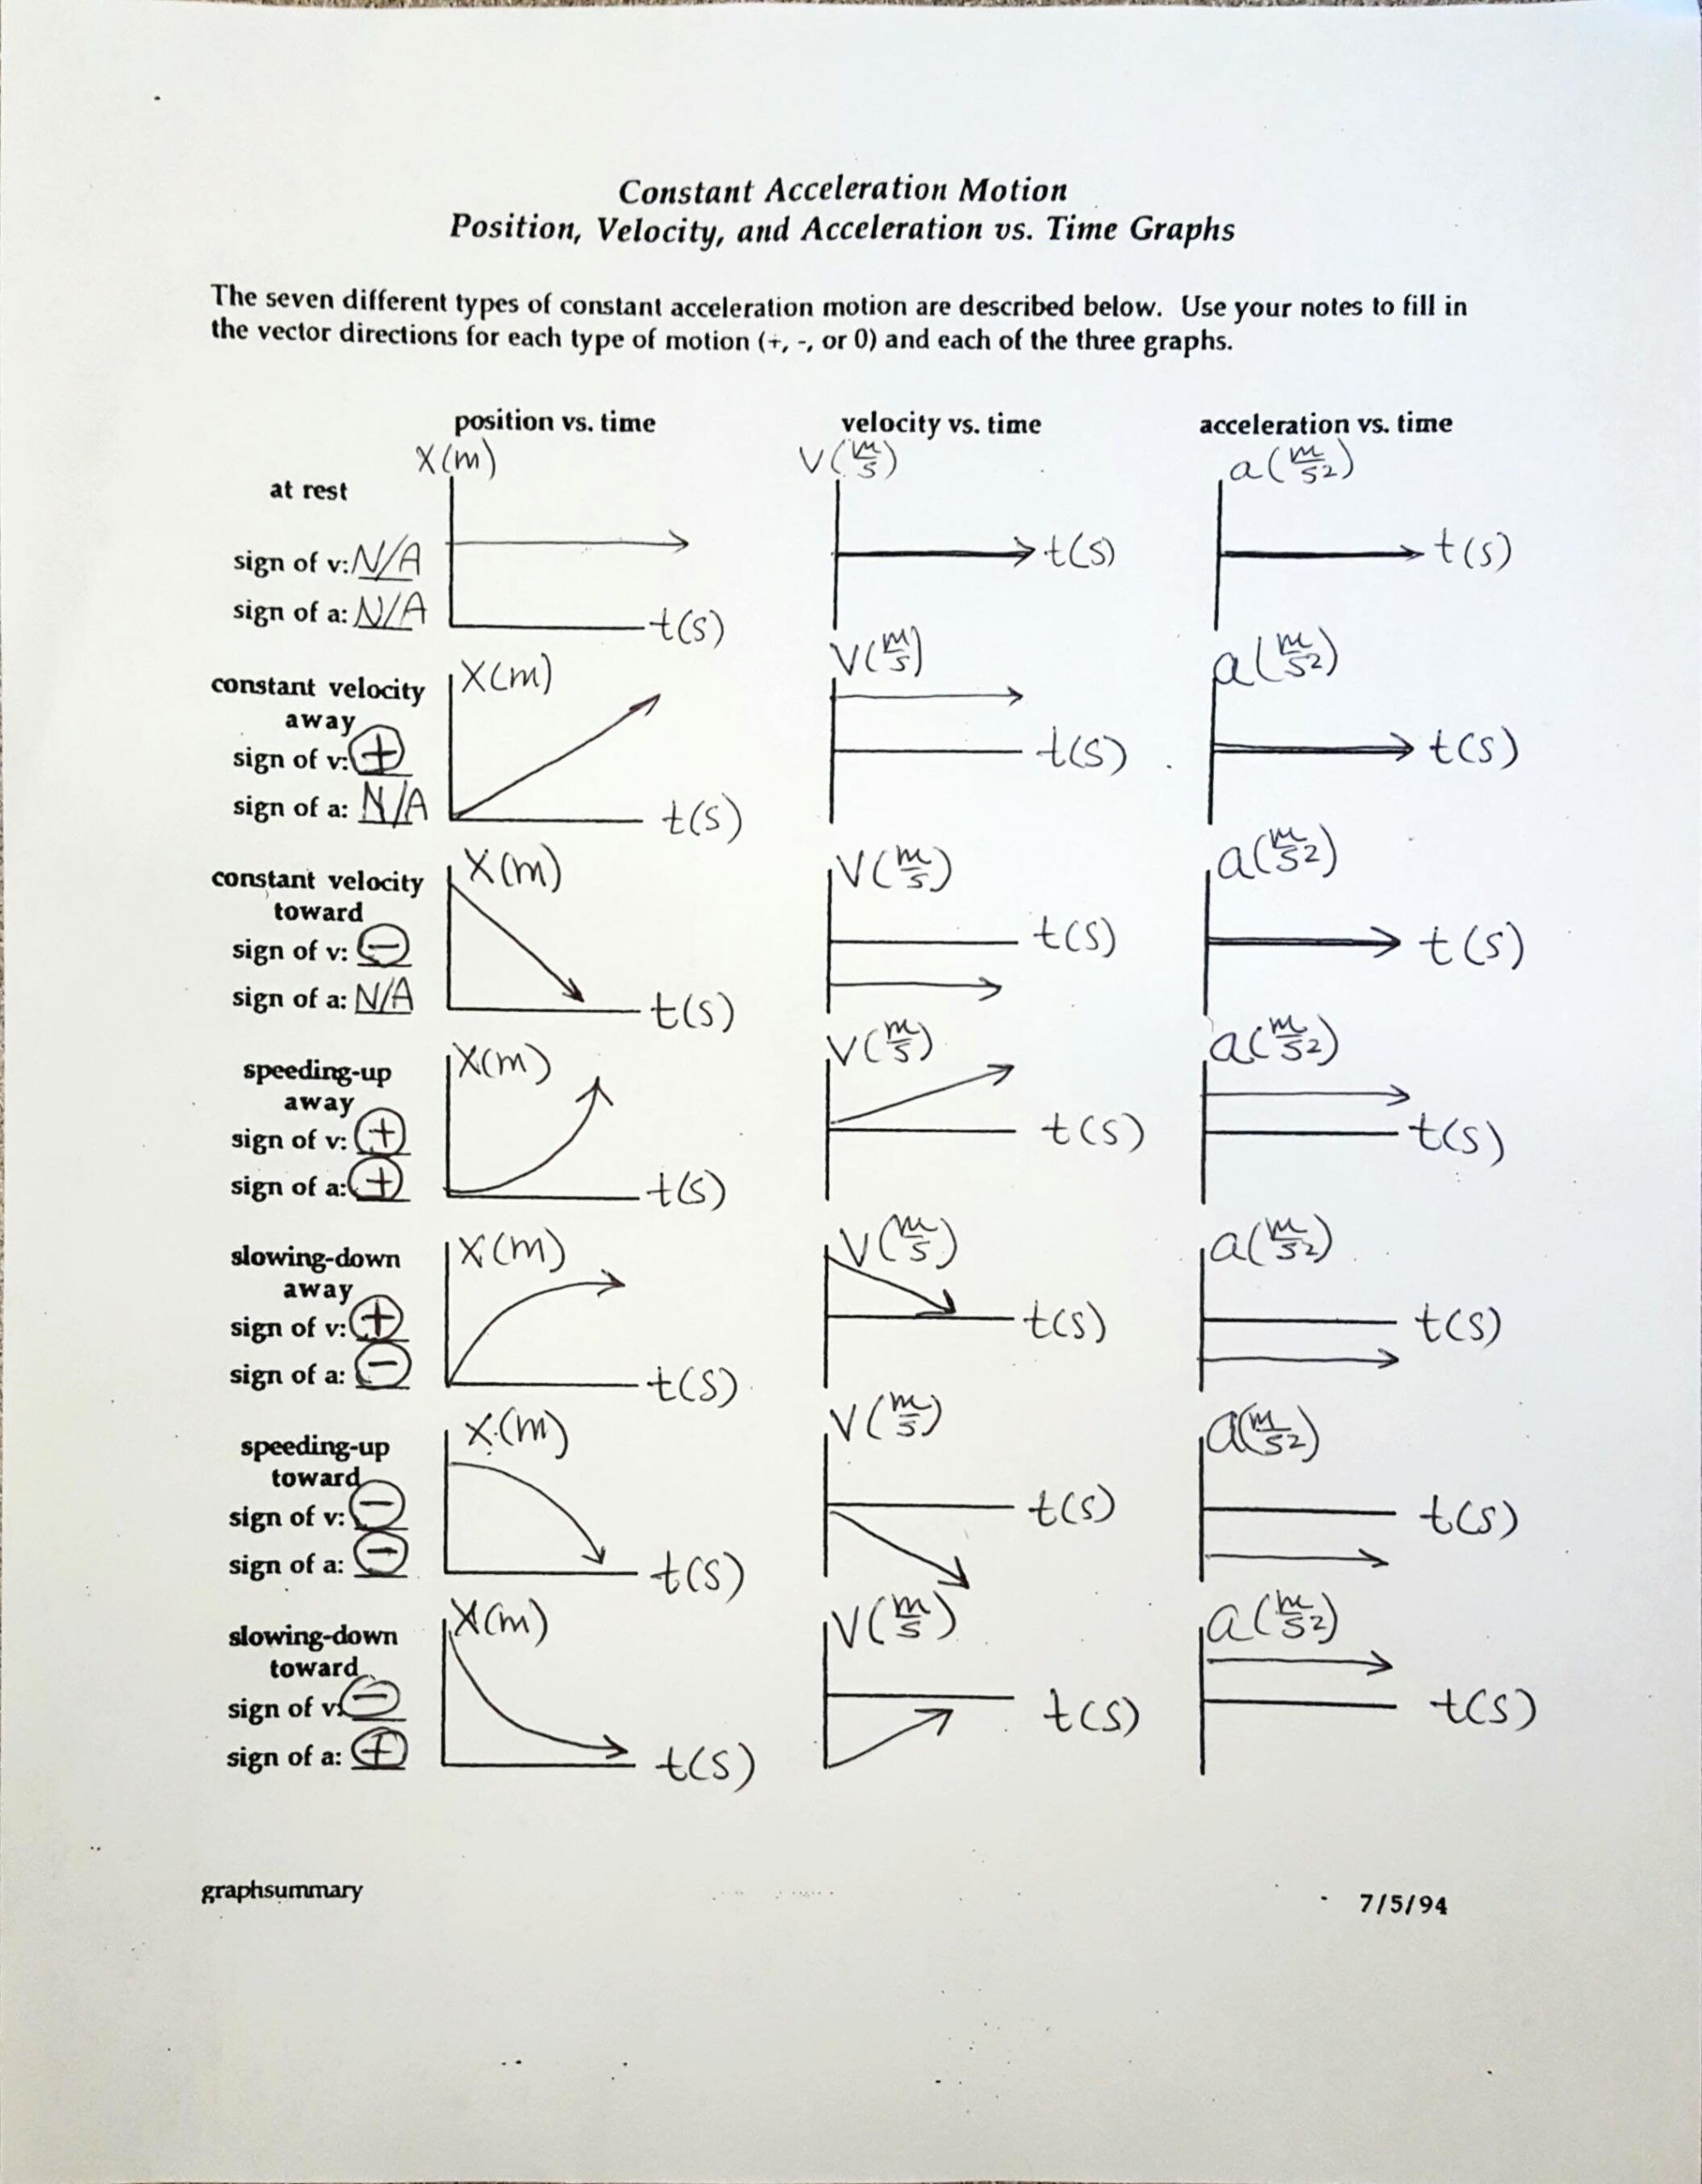 Speed Vs Time Graph Worksheet Position and Velocity Vs Time Graphs Worksheet Answers